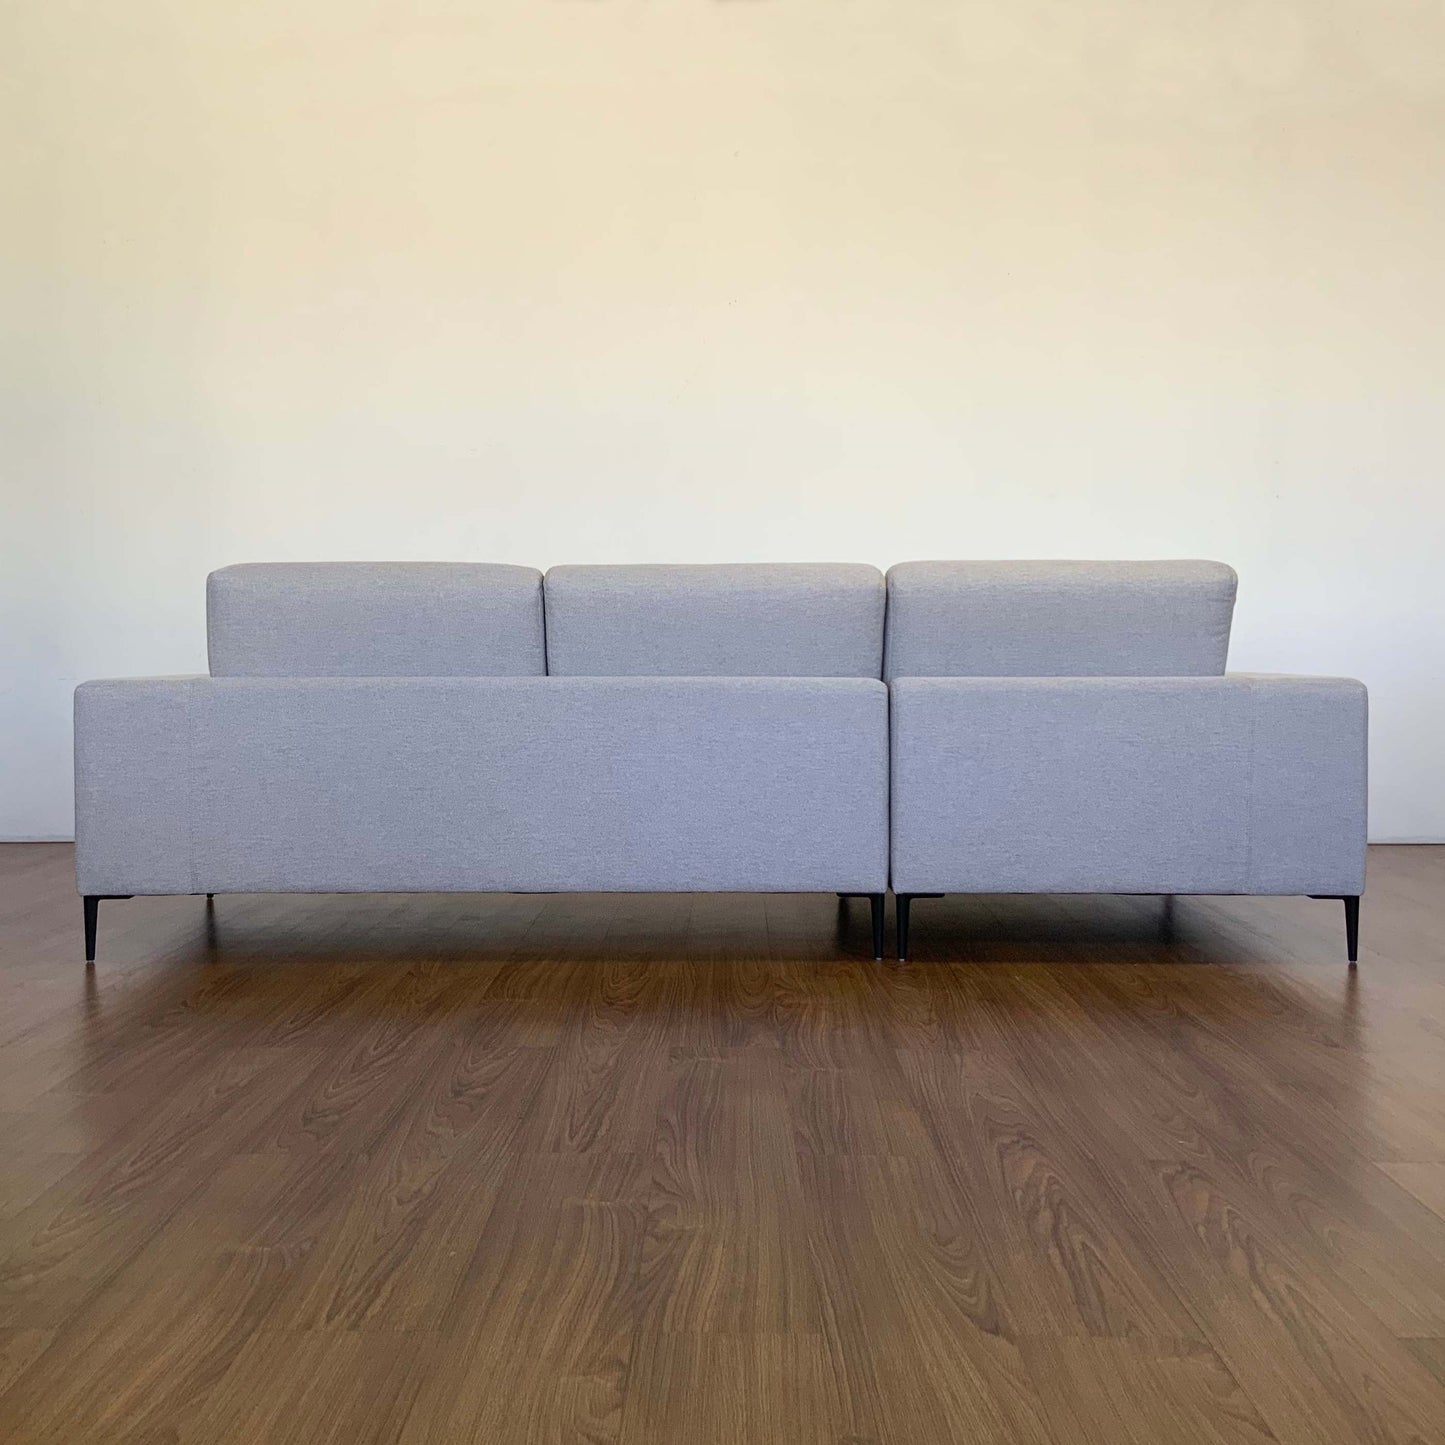 LENNOX SOFA  | VALUE RANGE FABRICS | MULTIPLE SIZES AND OPTIONS AVAILABLE | MADE TO ORDER IN WA